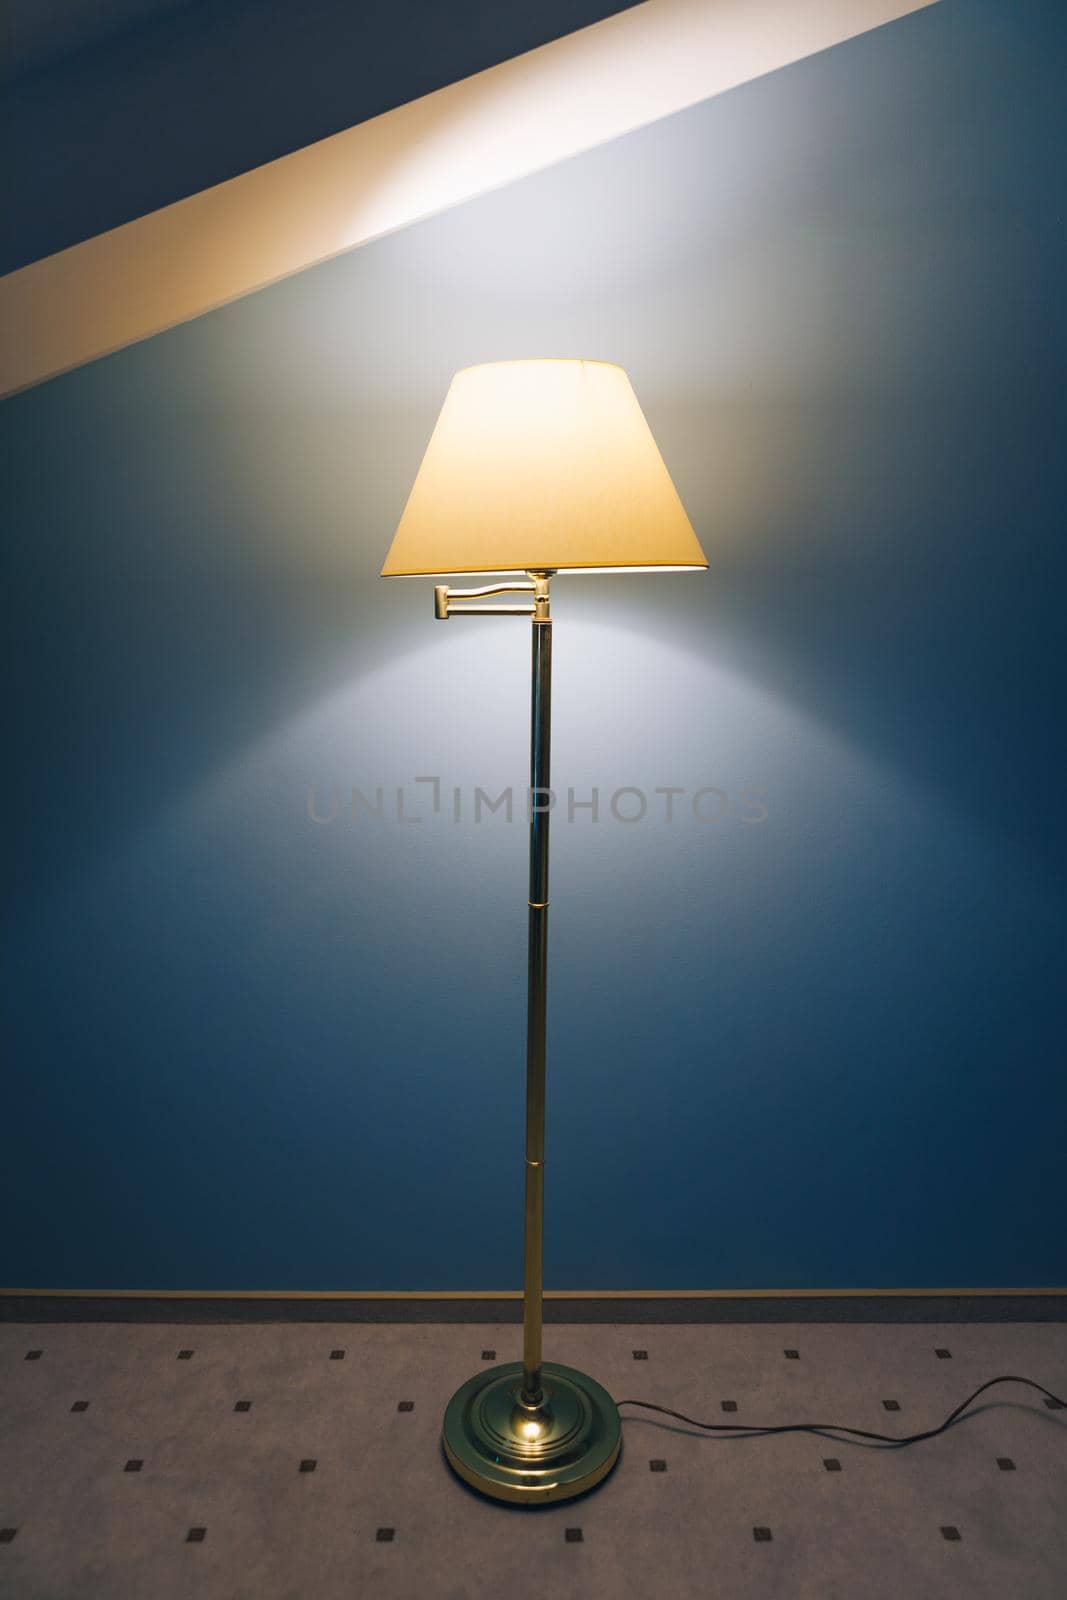 lamp light on blue background with copy-space